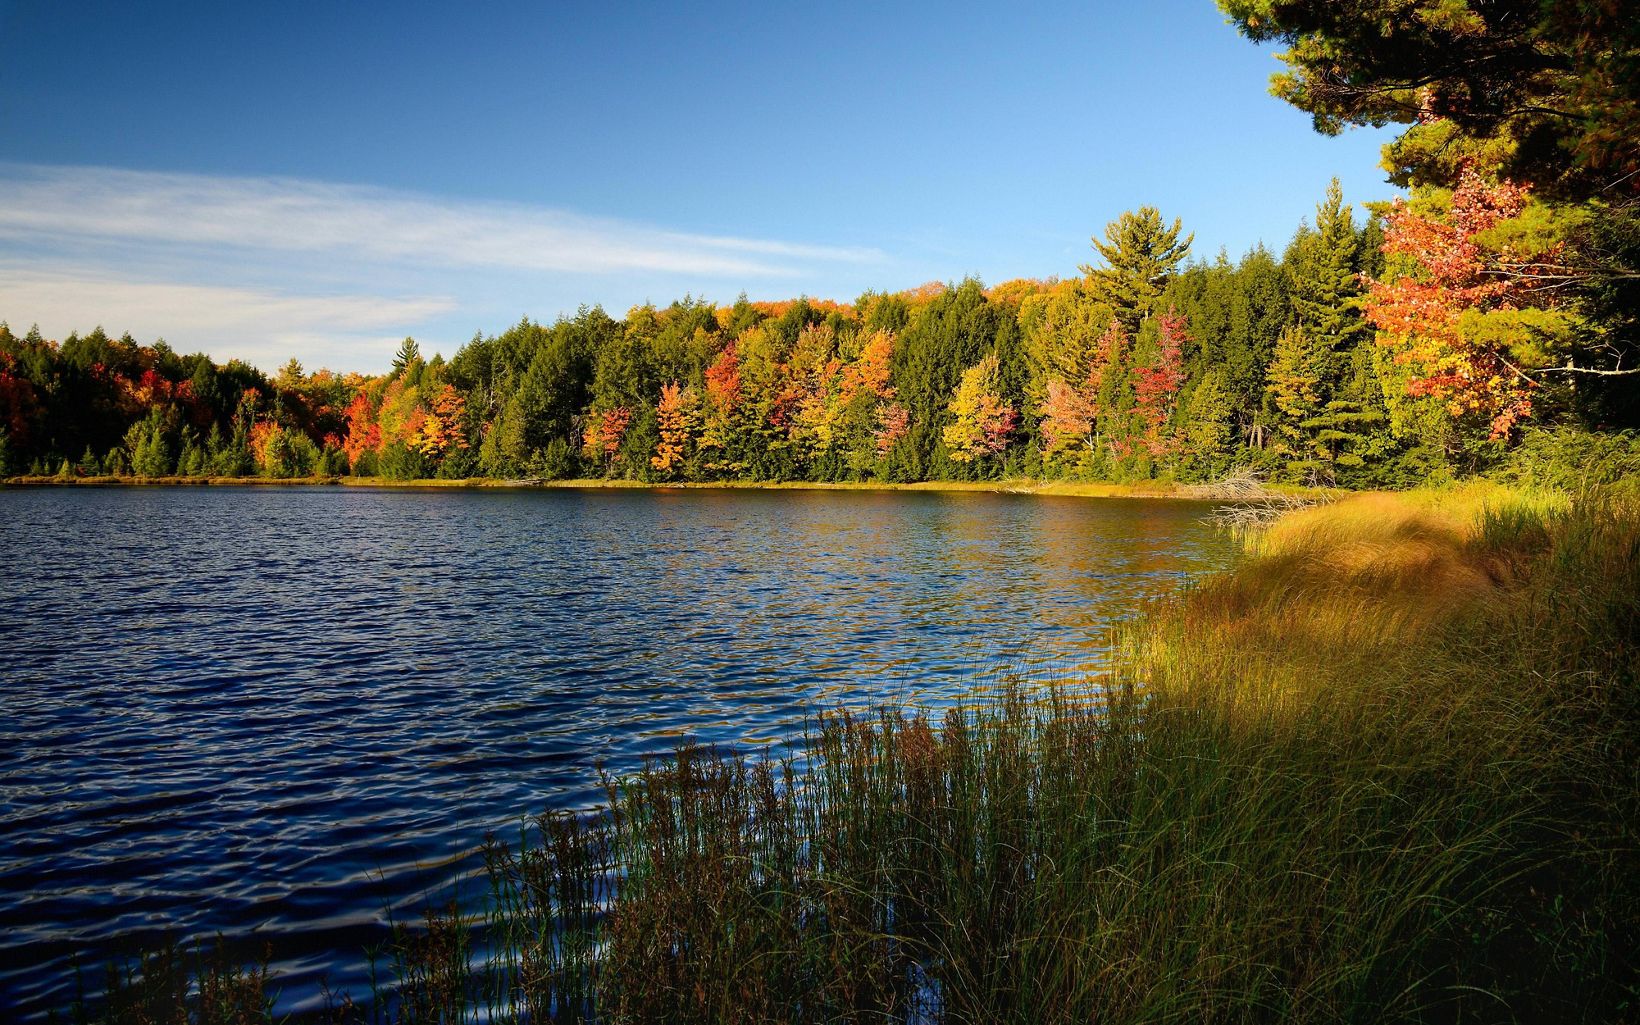 Red, orange and yellow fall colors mix with the green of the conifer trees that fringe a blue lake with wetlands in the foreground and blue sky overhead.